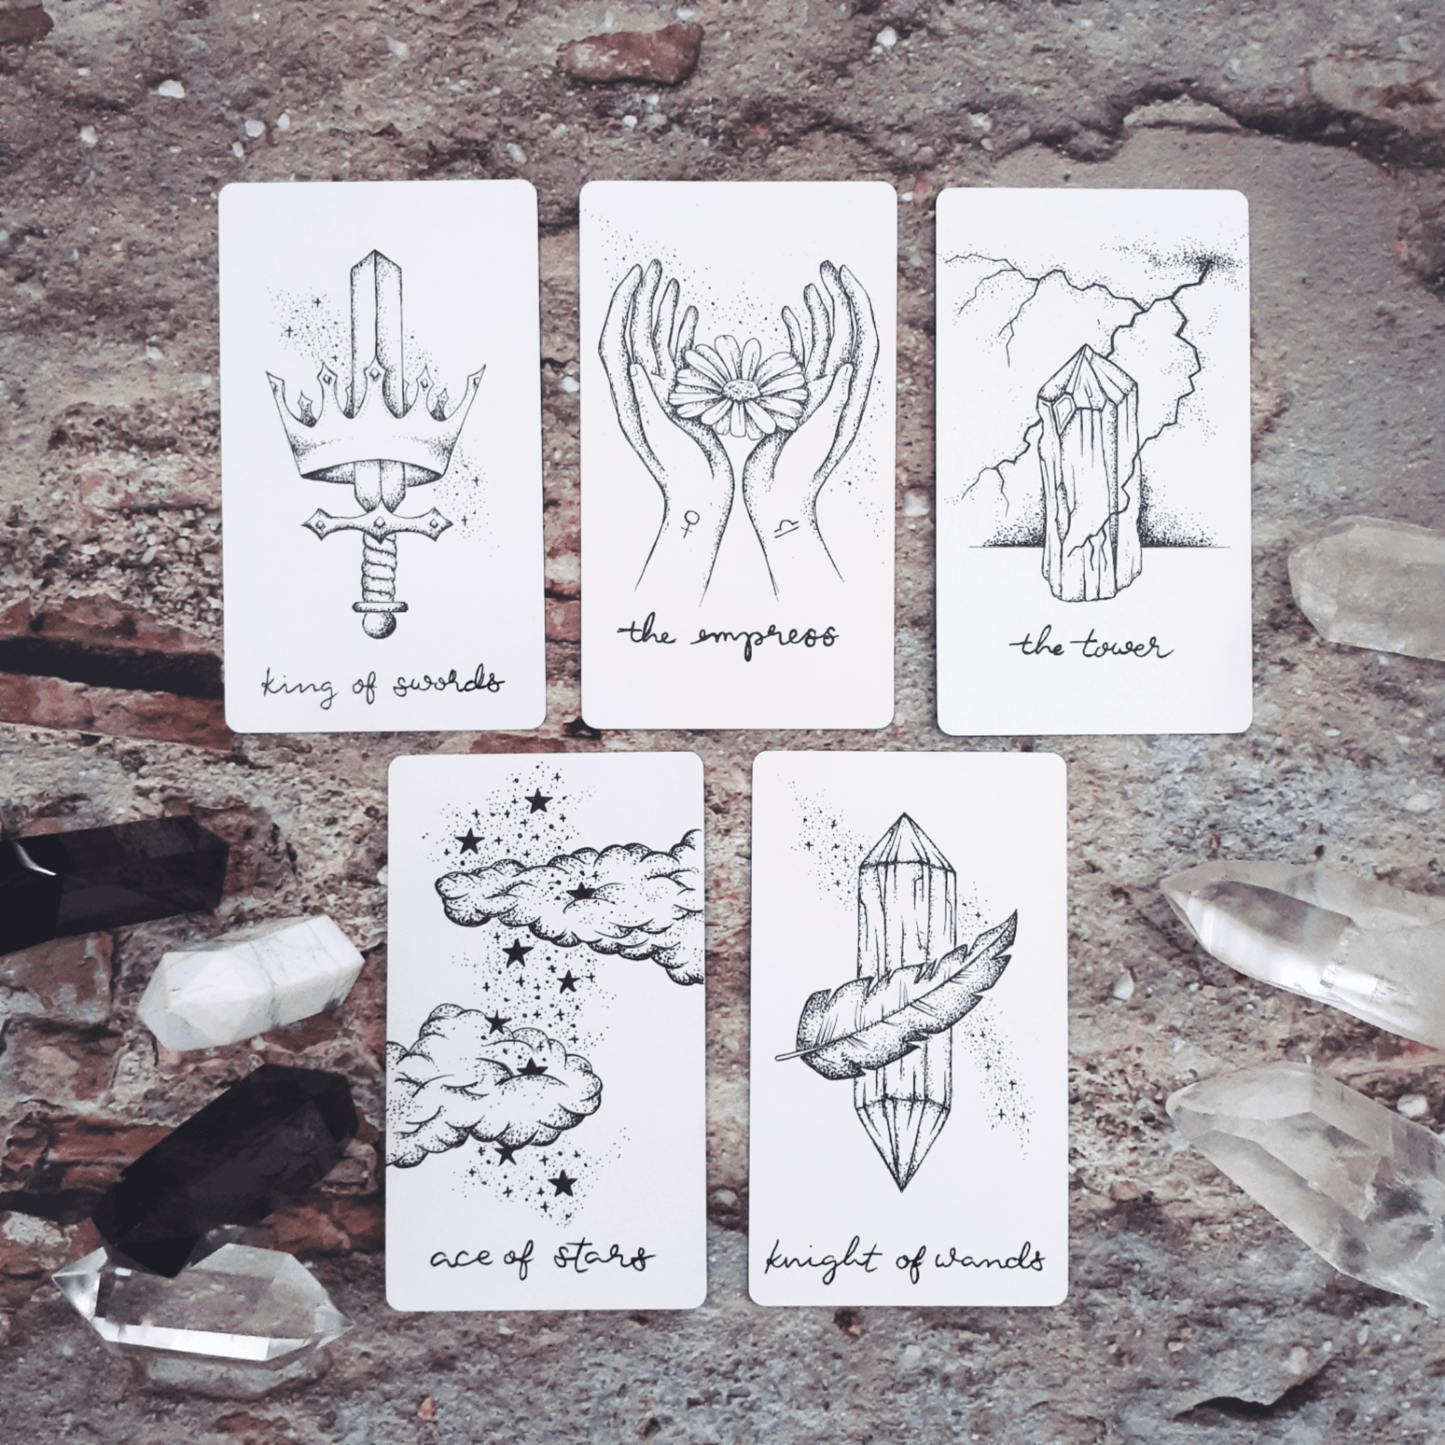 wandering moon tarot deck| holographic, hand illustrated tarot cards | indie tarot deck with guidebook | beginner tarot deck - The Wandering Moon Co.